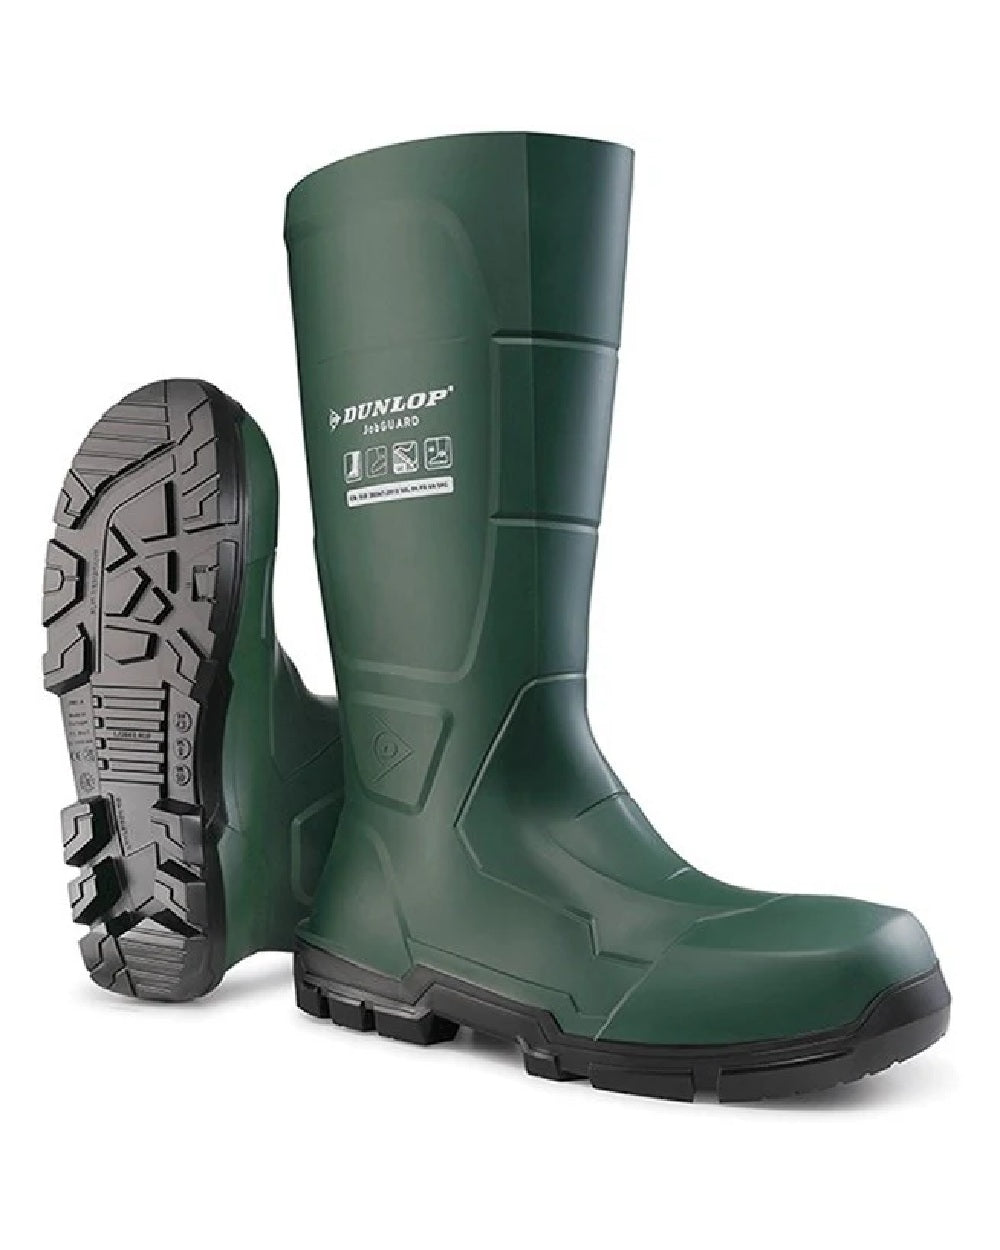 Heritage Green coloured Dunlop JobGuard Wellingtons on white background 